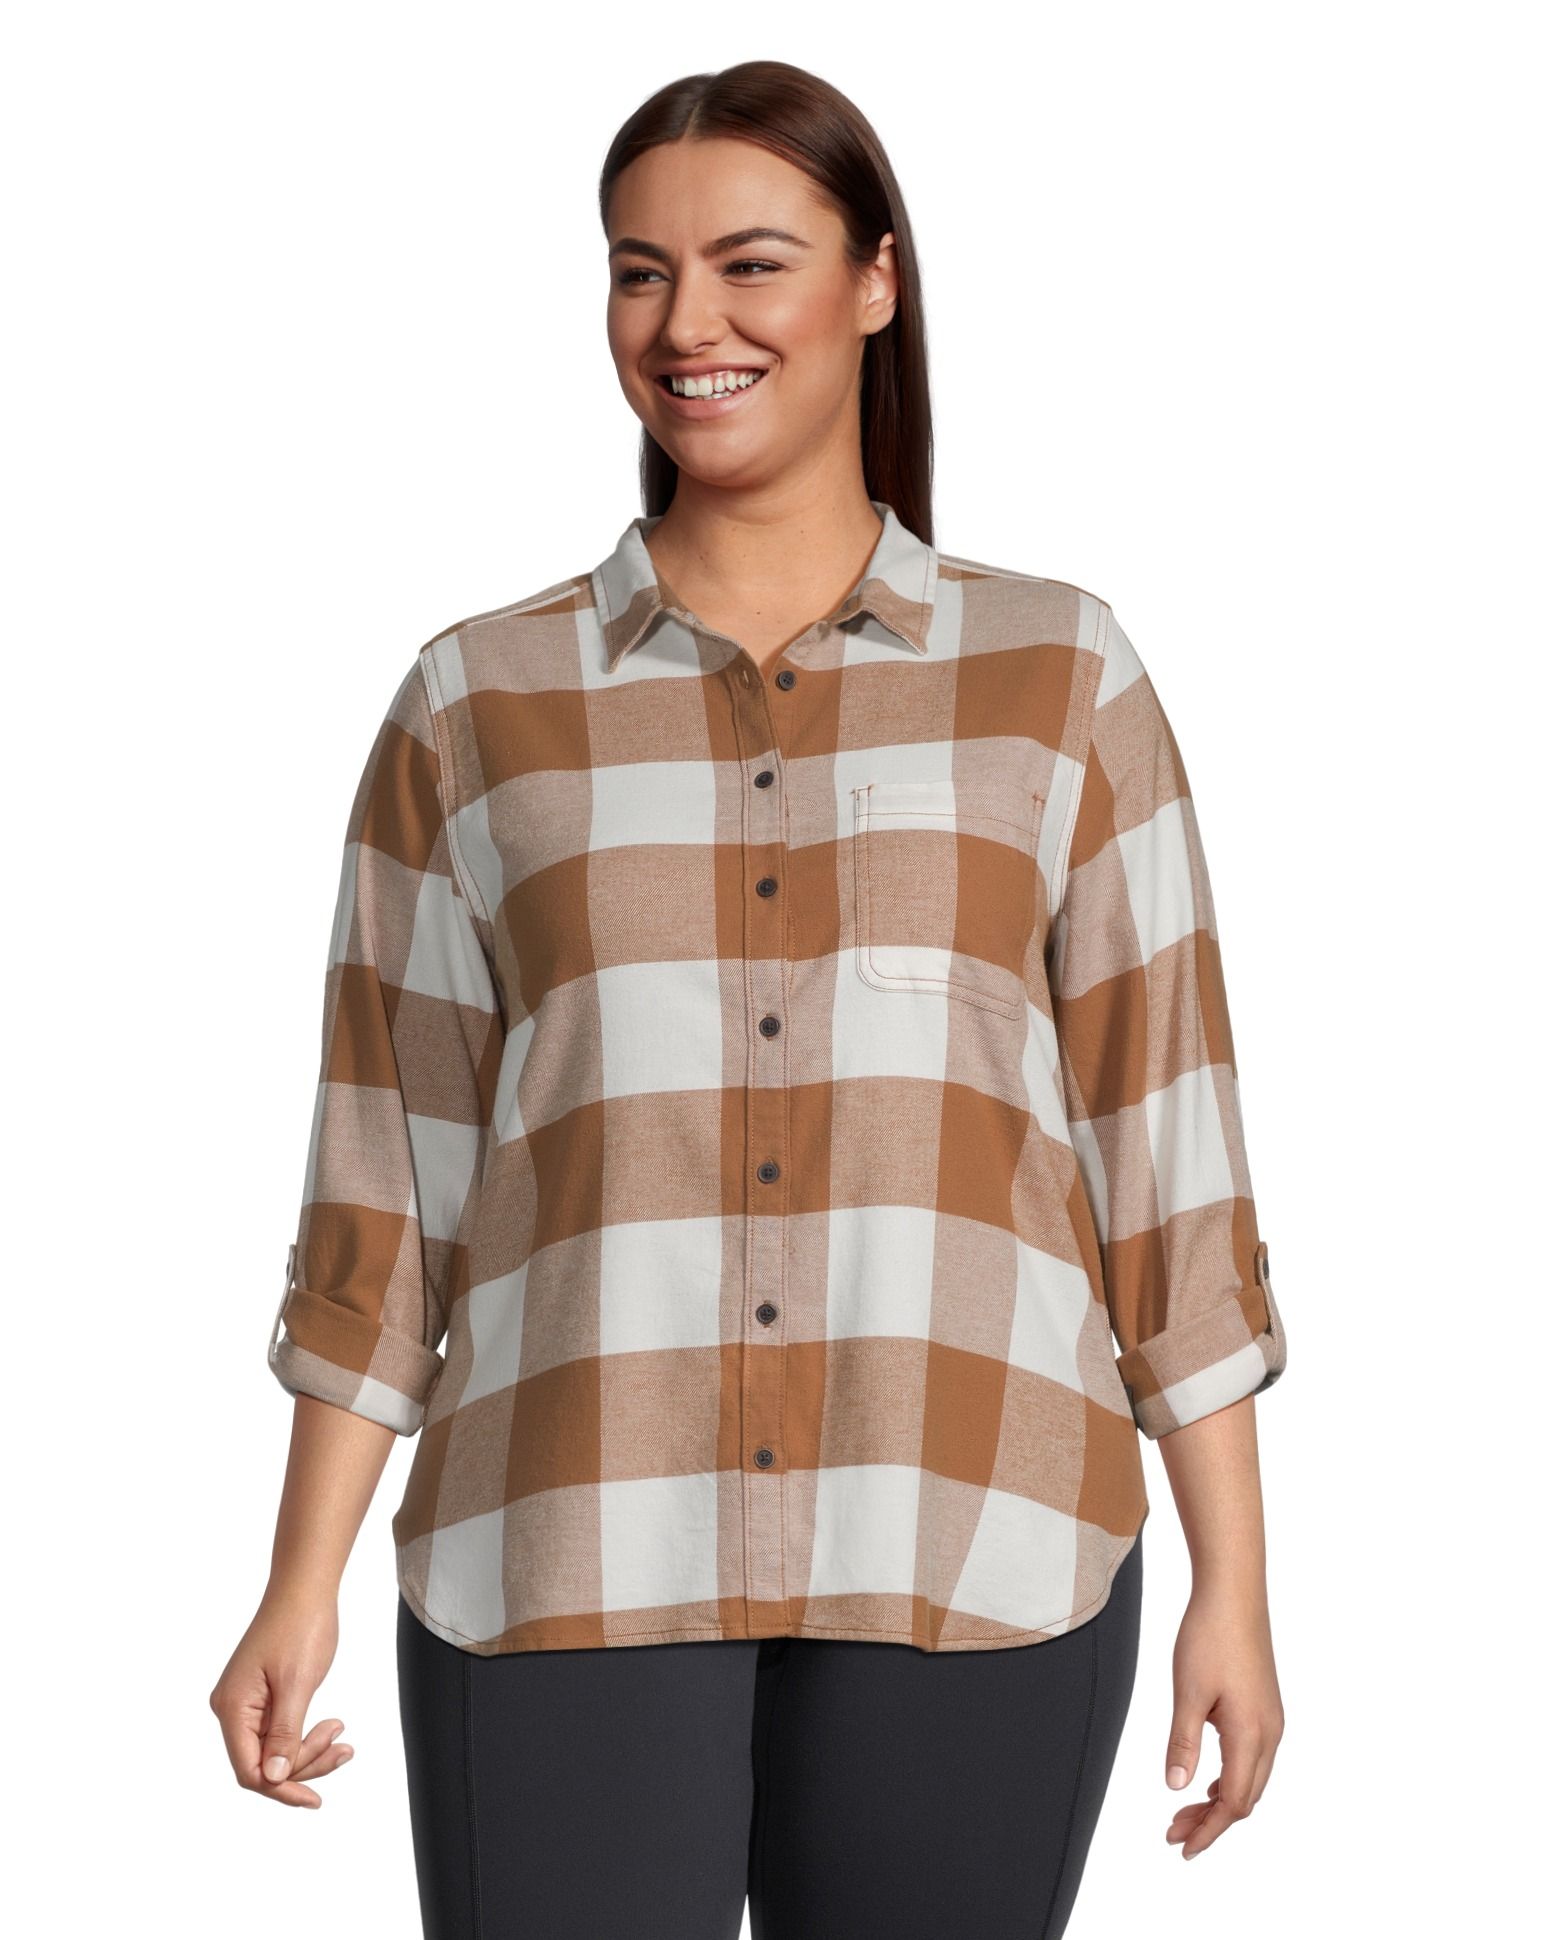 WindRiver Women's Semi-fit Long Sleeve Button Up Soft Brushed